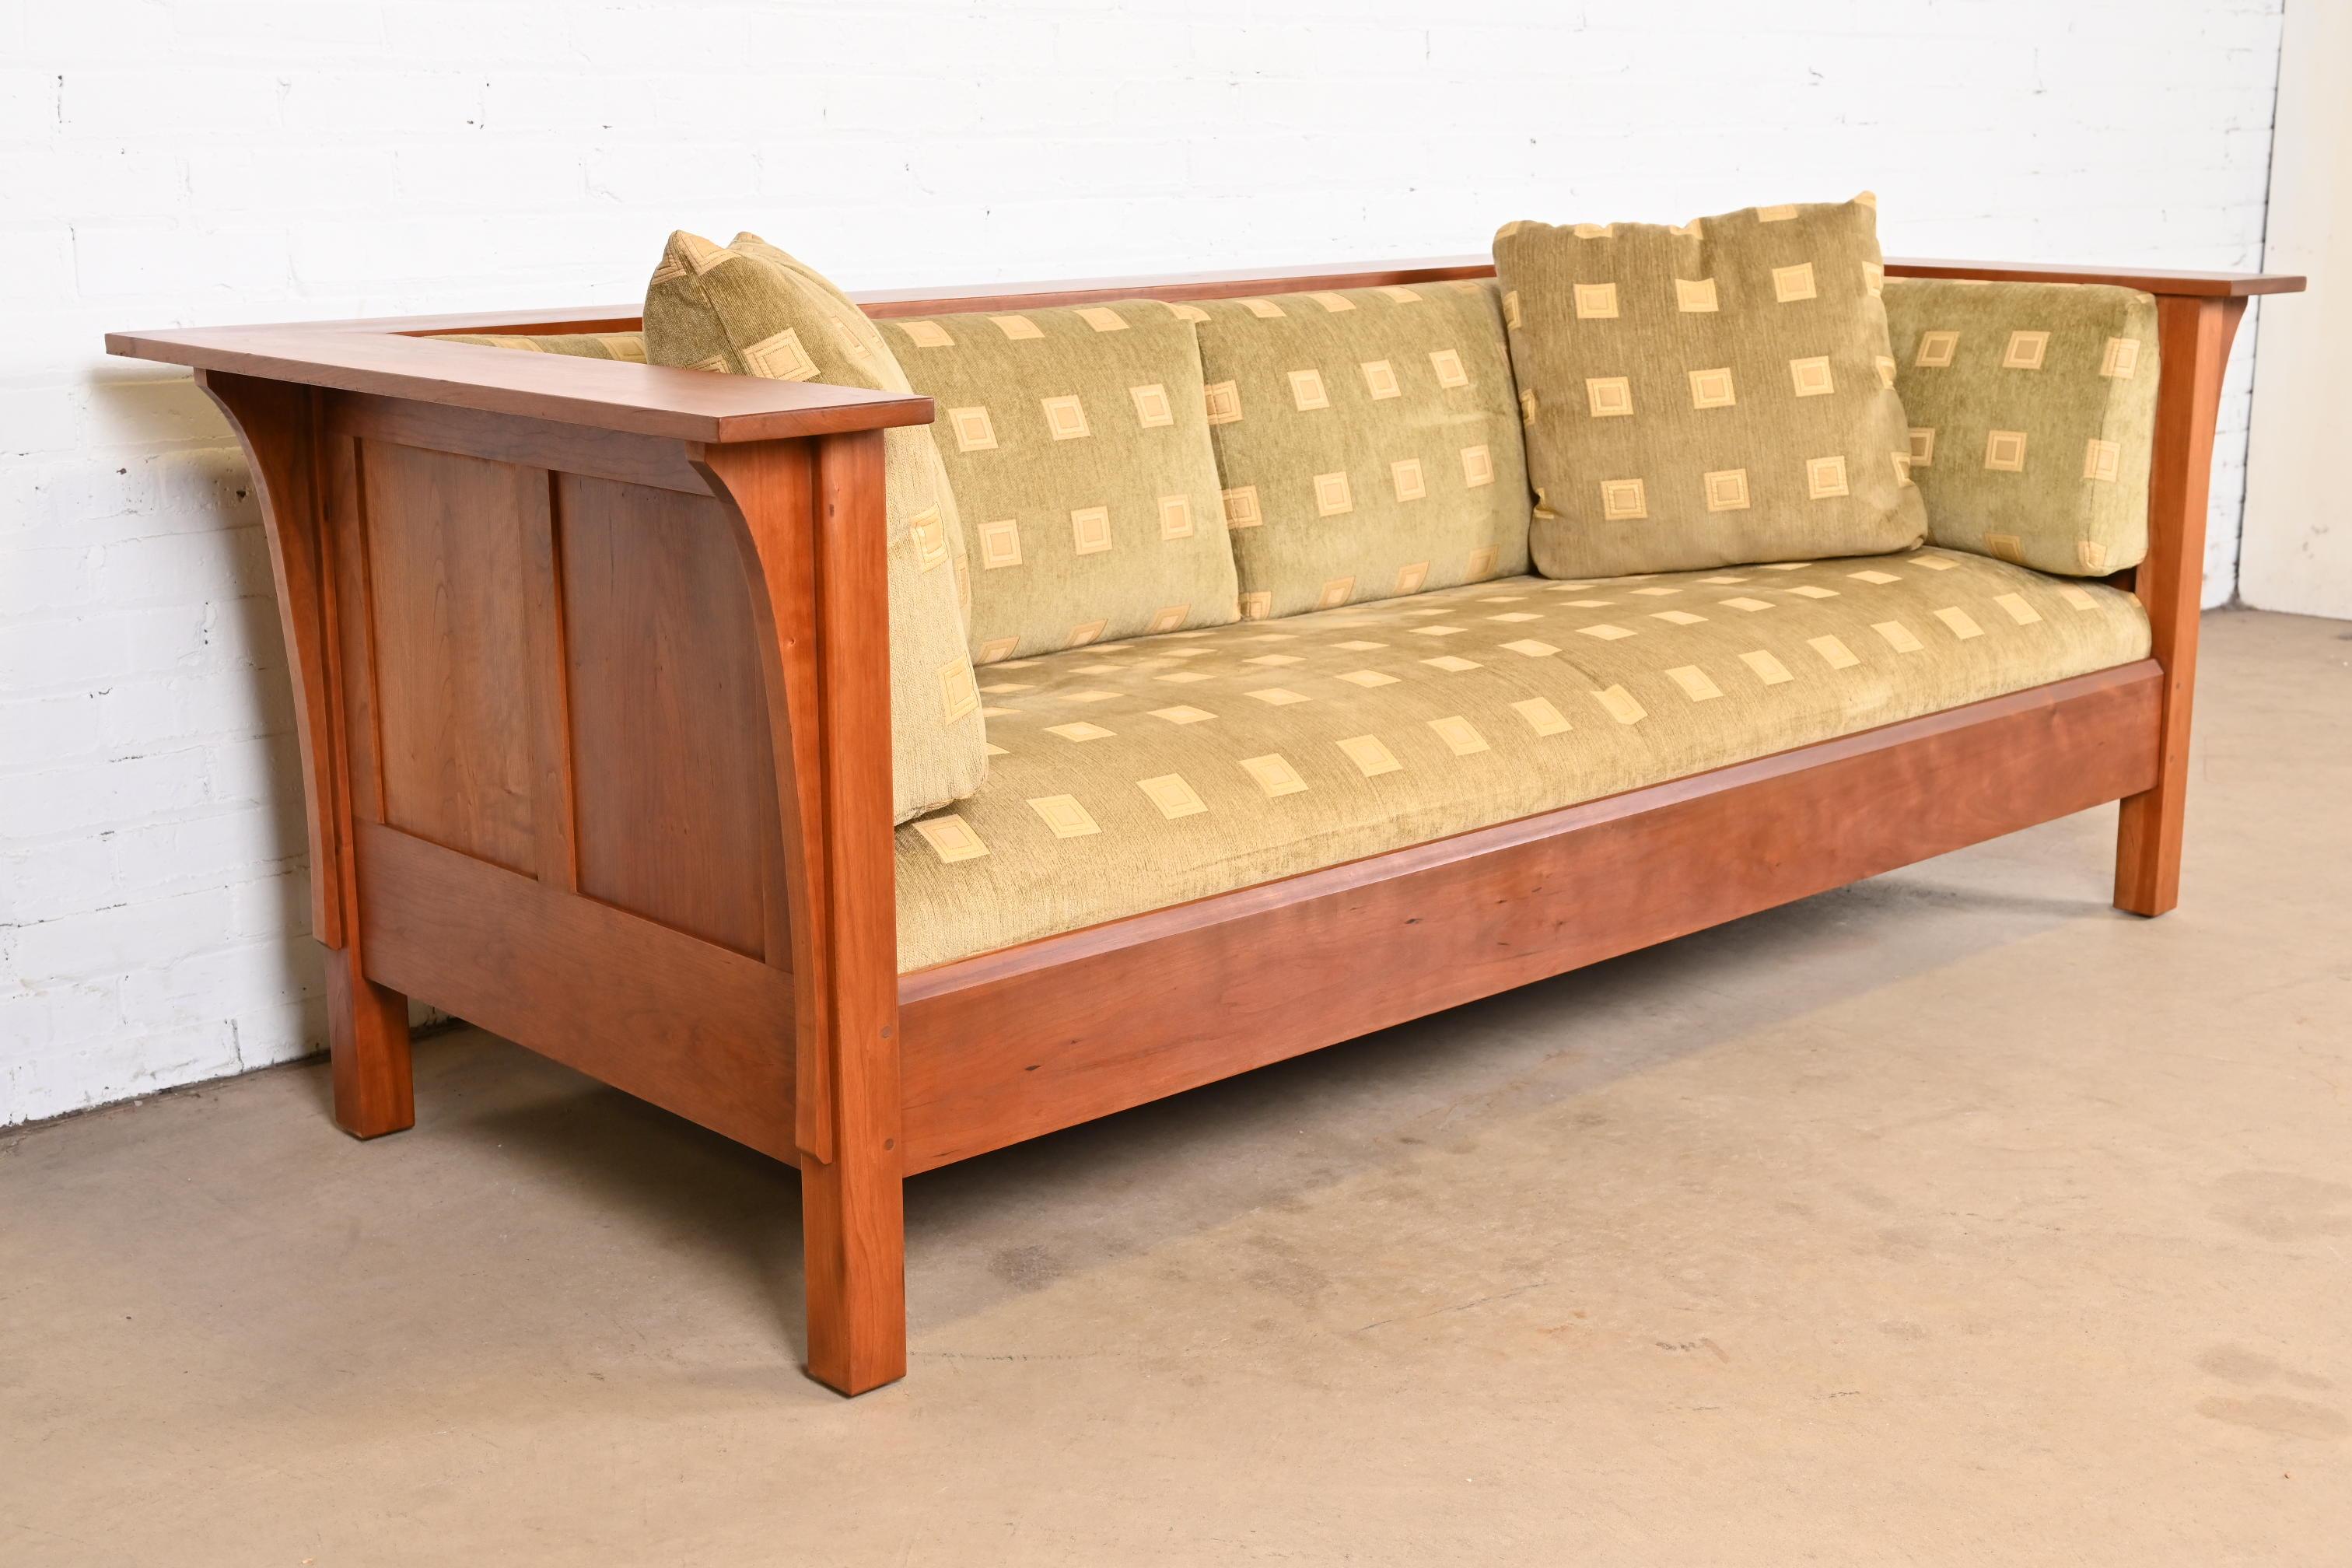 Contemporary Stickley Mission Arts and Crafts Cherry Wood Settle Sofa For Sale